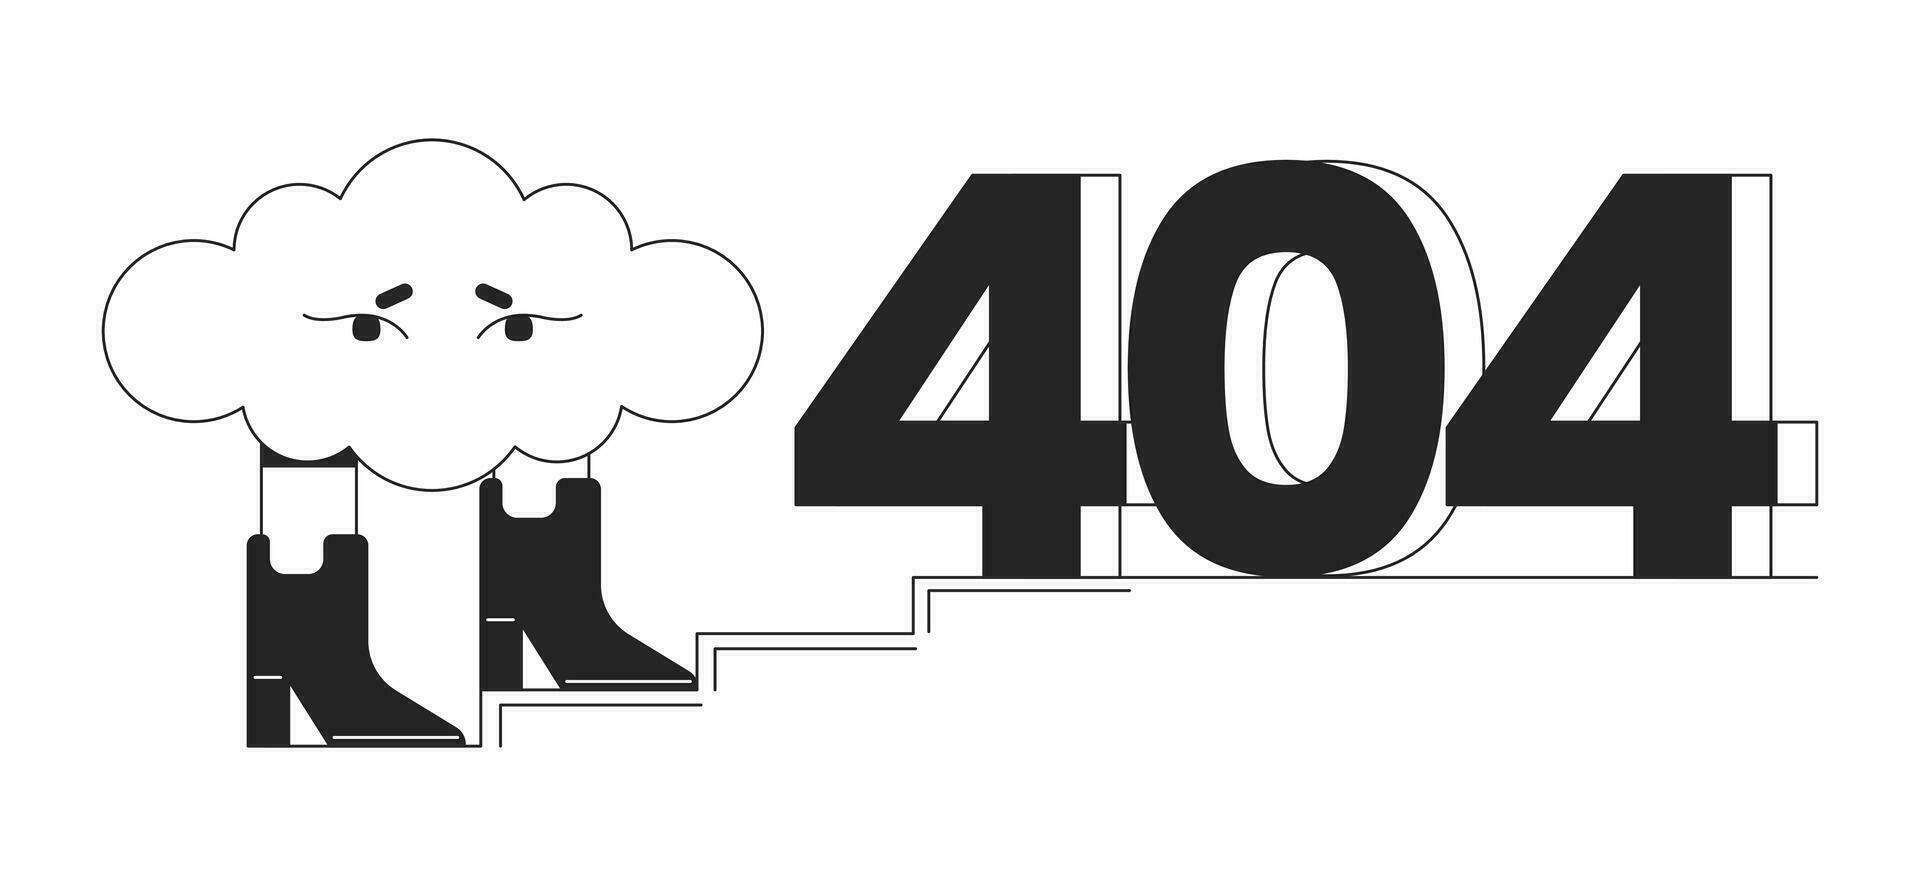 Surreal cloud in boots with obstacle on stairs black white error 404 flash message. Monochrome empty state ui design. Page not found popup cartoon image. Vector flat outline illustration concept